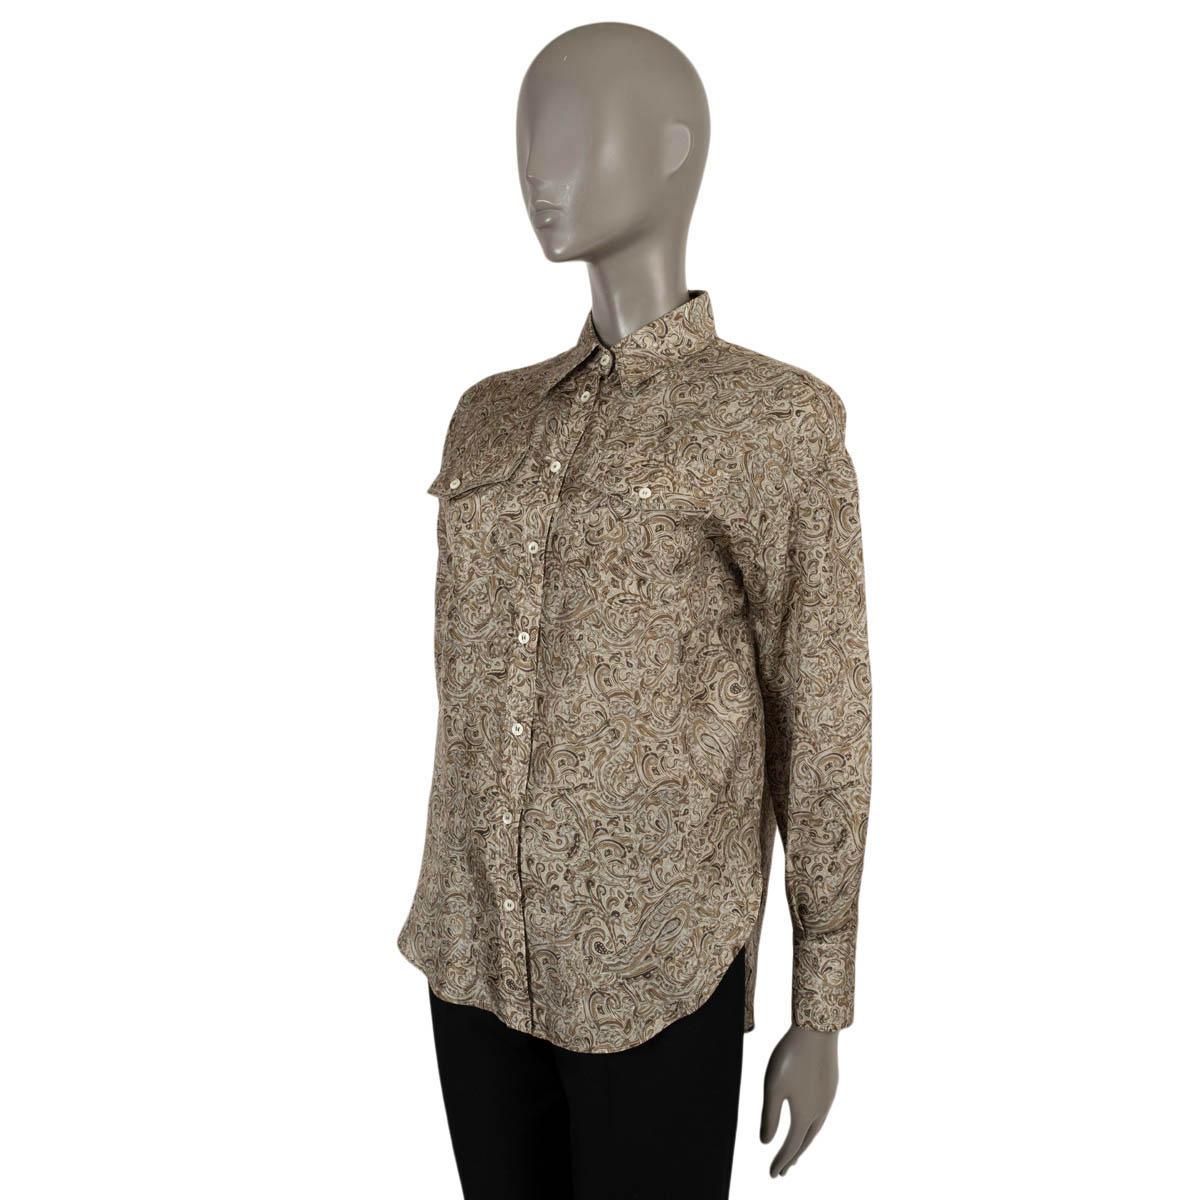 100% authentic Brunello Cucinelli paisley blouse in grey silk (100%). Features two flap chest pockets. Closes with mother-of-pearl buttons. Has been worn and is in excellent condition.

Measurements
Tag Size	XS
Size	XS
Shoulder Width	48cm